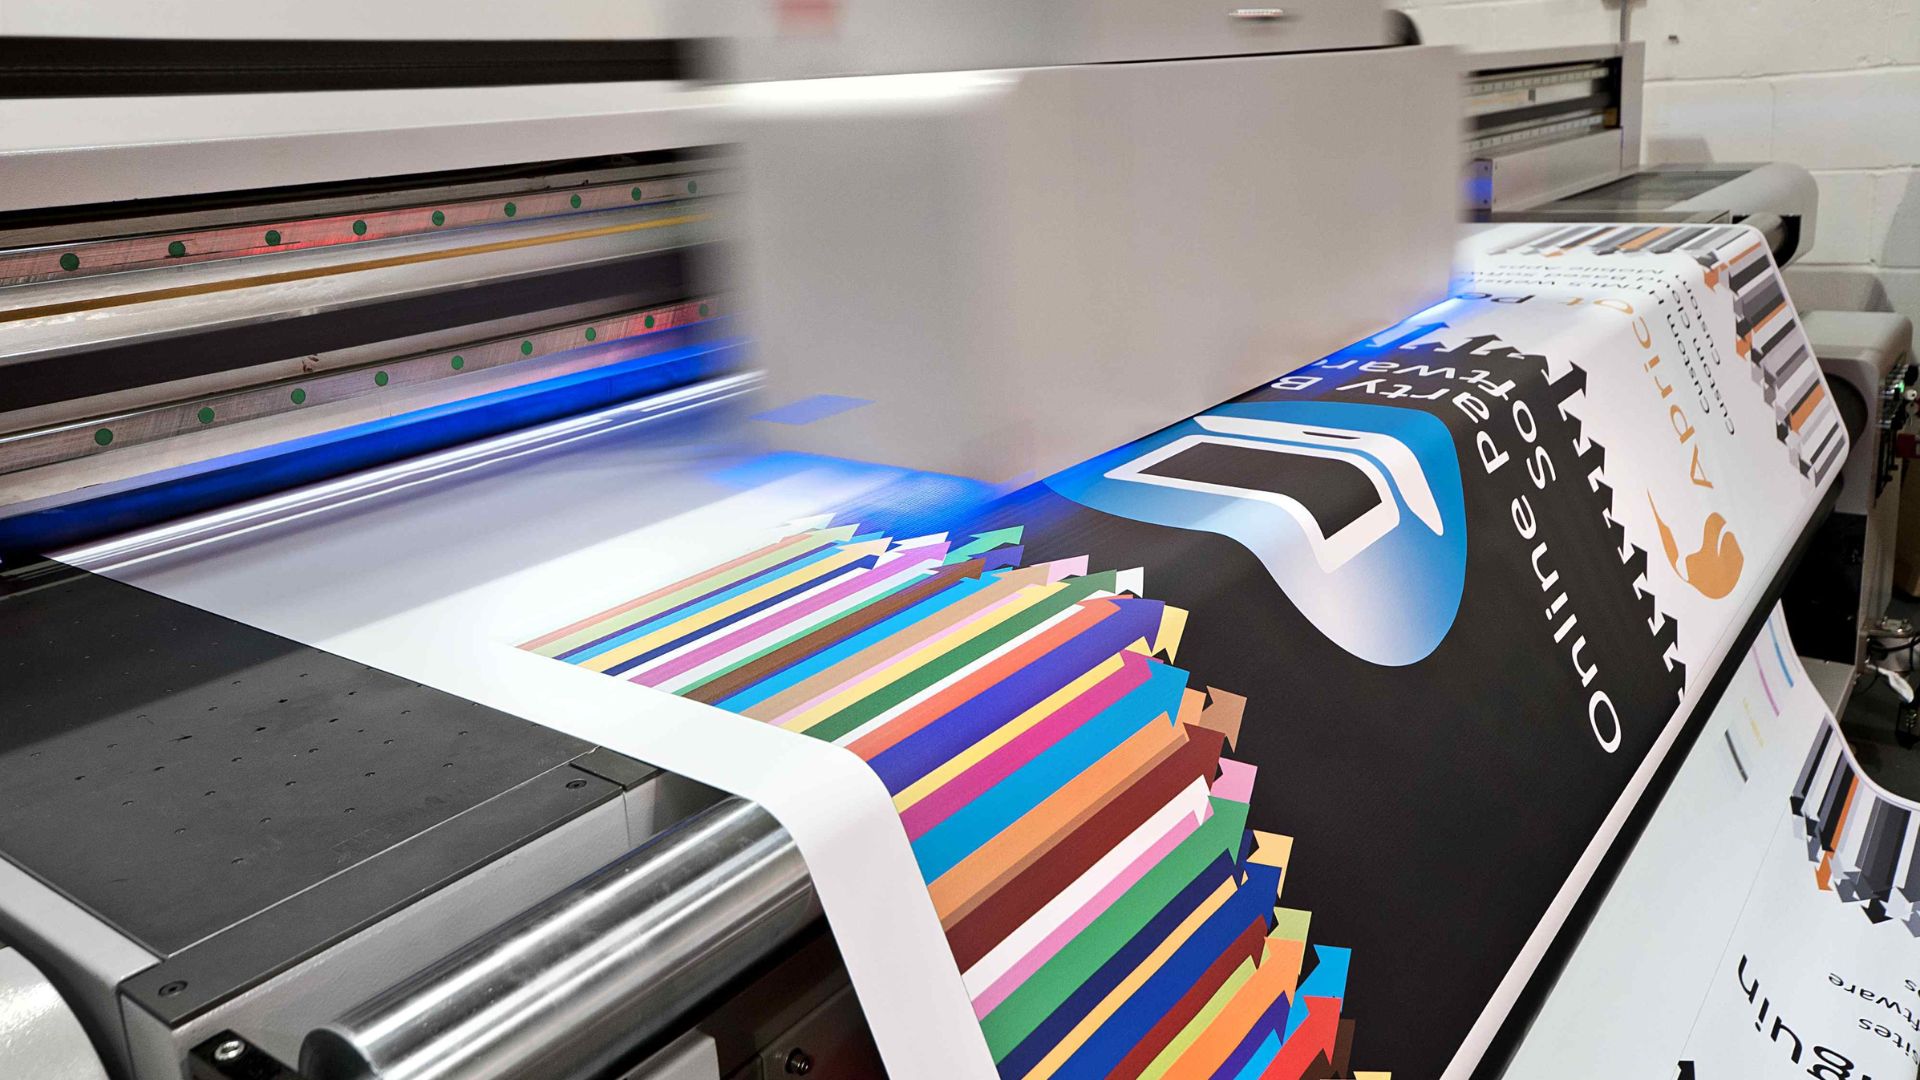 What Makеs Digital Printing a Gamе-Changеr in Modеrn Markеting